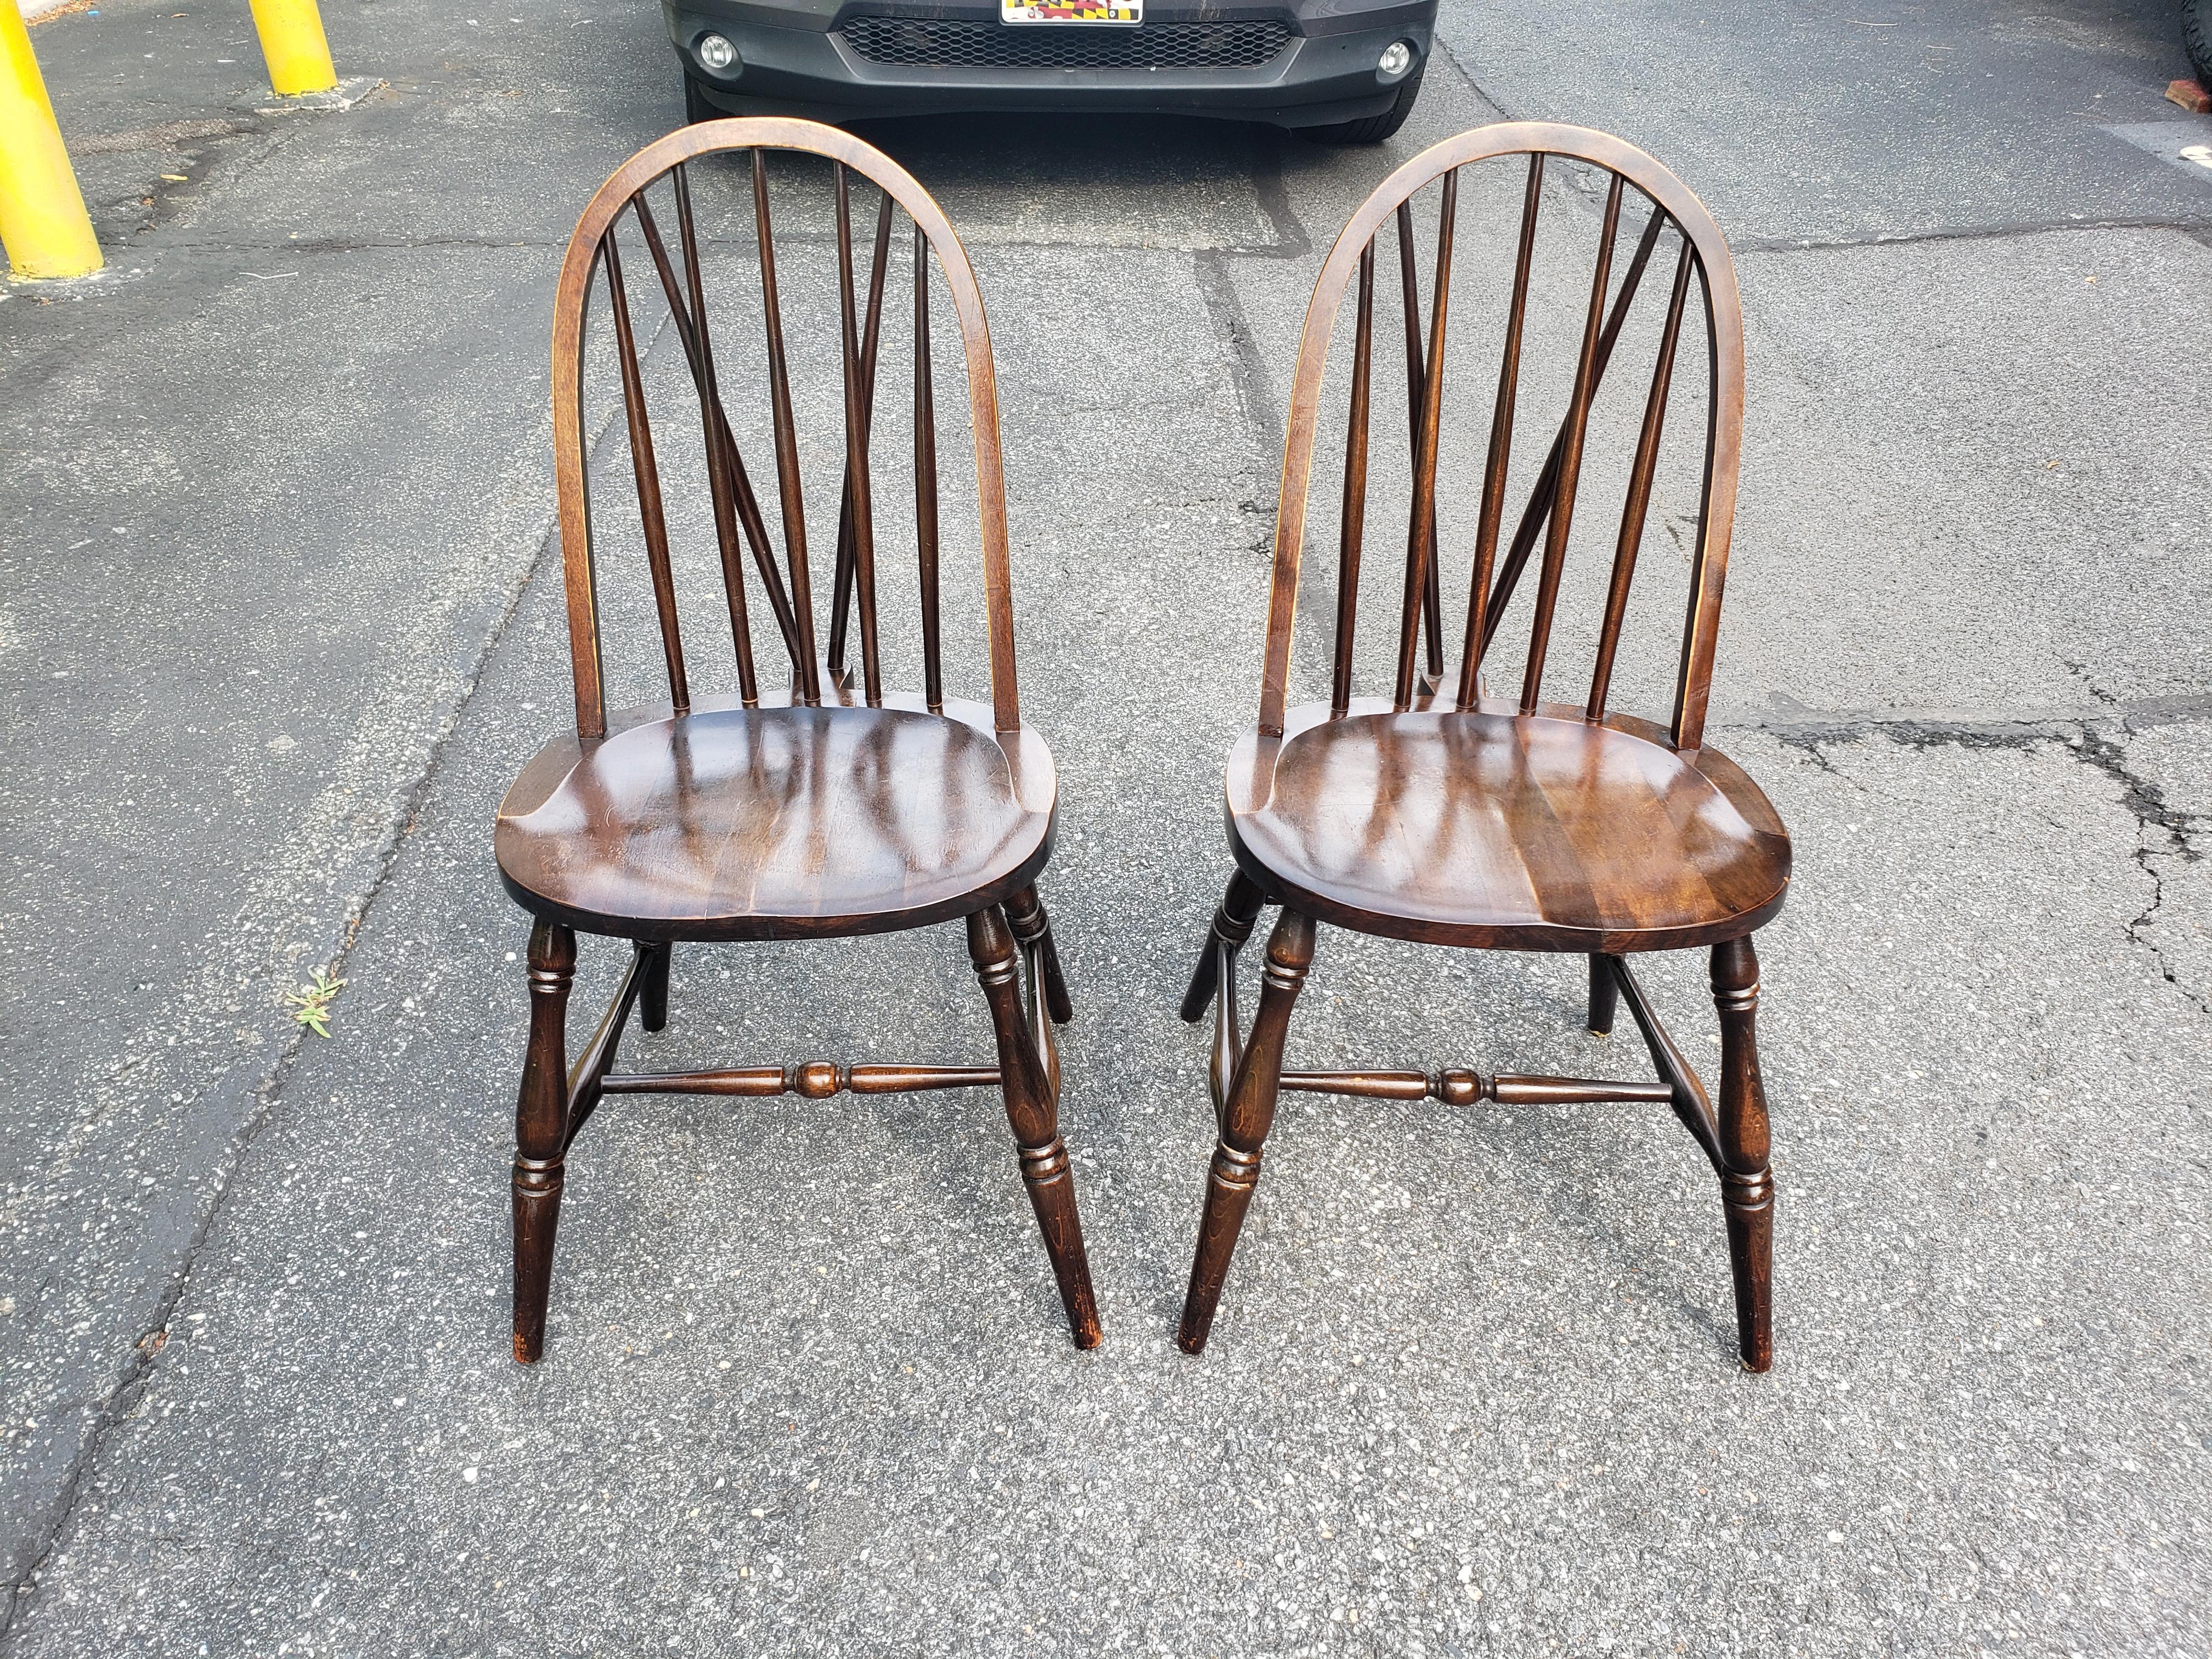 Stained 1900s Parkersburg Chair Walnut Brace Back Windsor Side Chairs, Pair